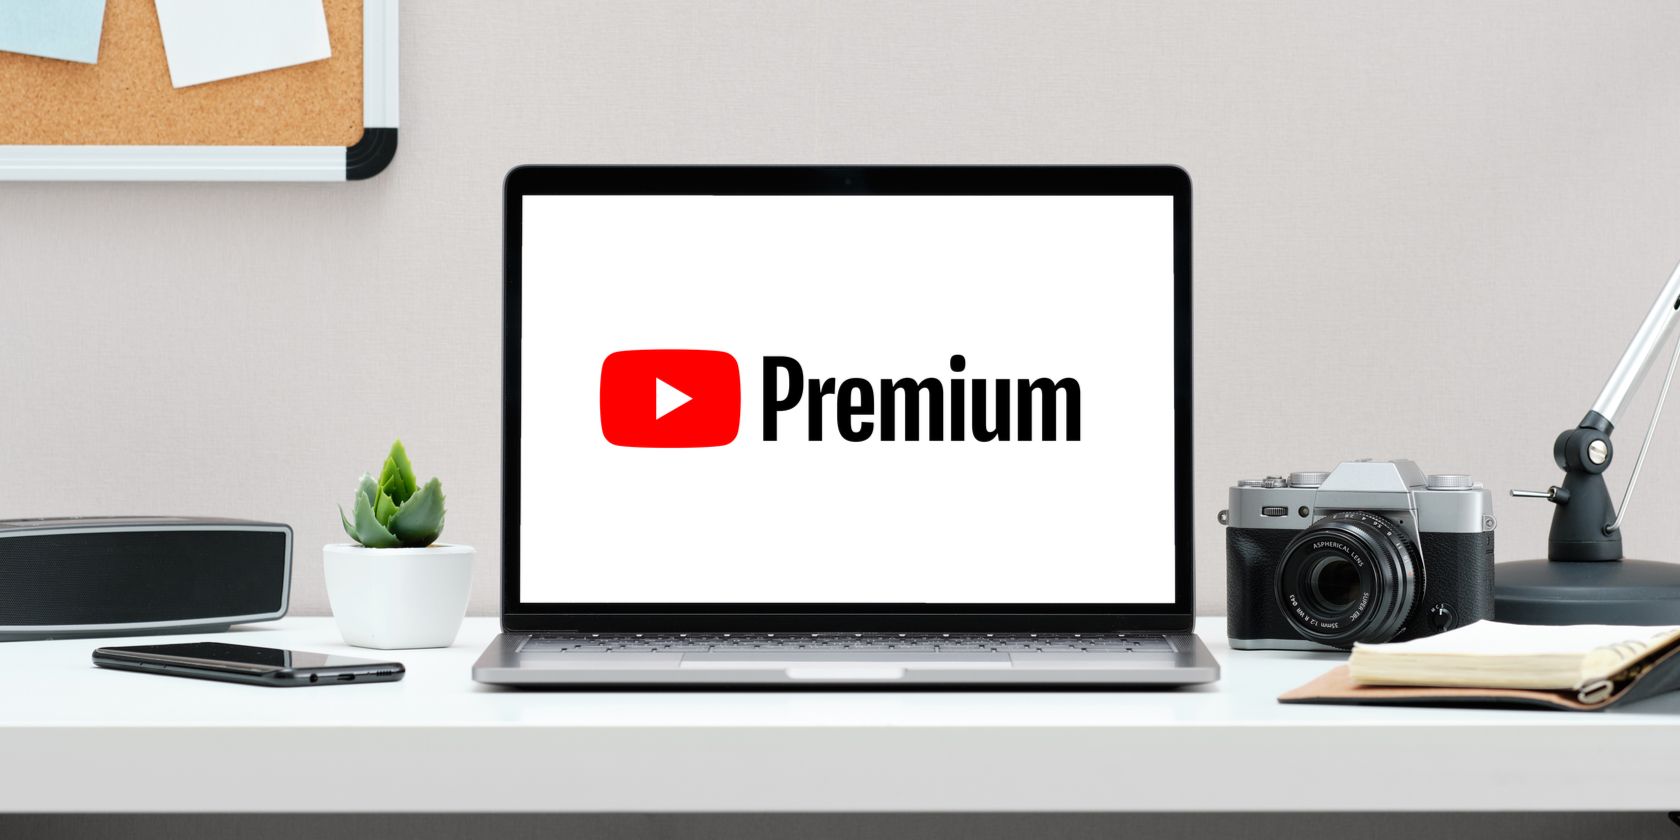 YouTube Premium is getting a full loadout of new features - Tubefilter